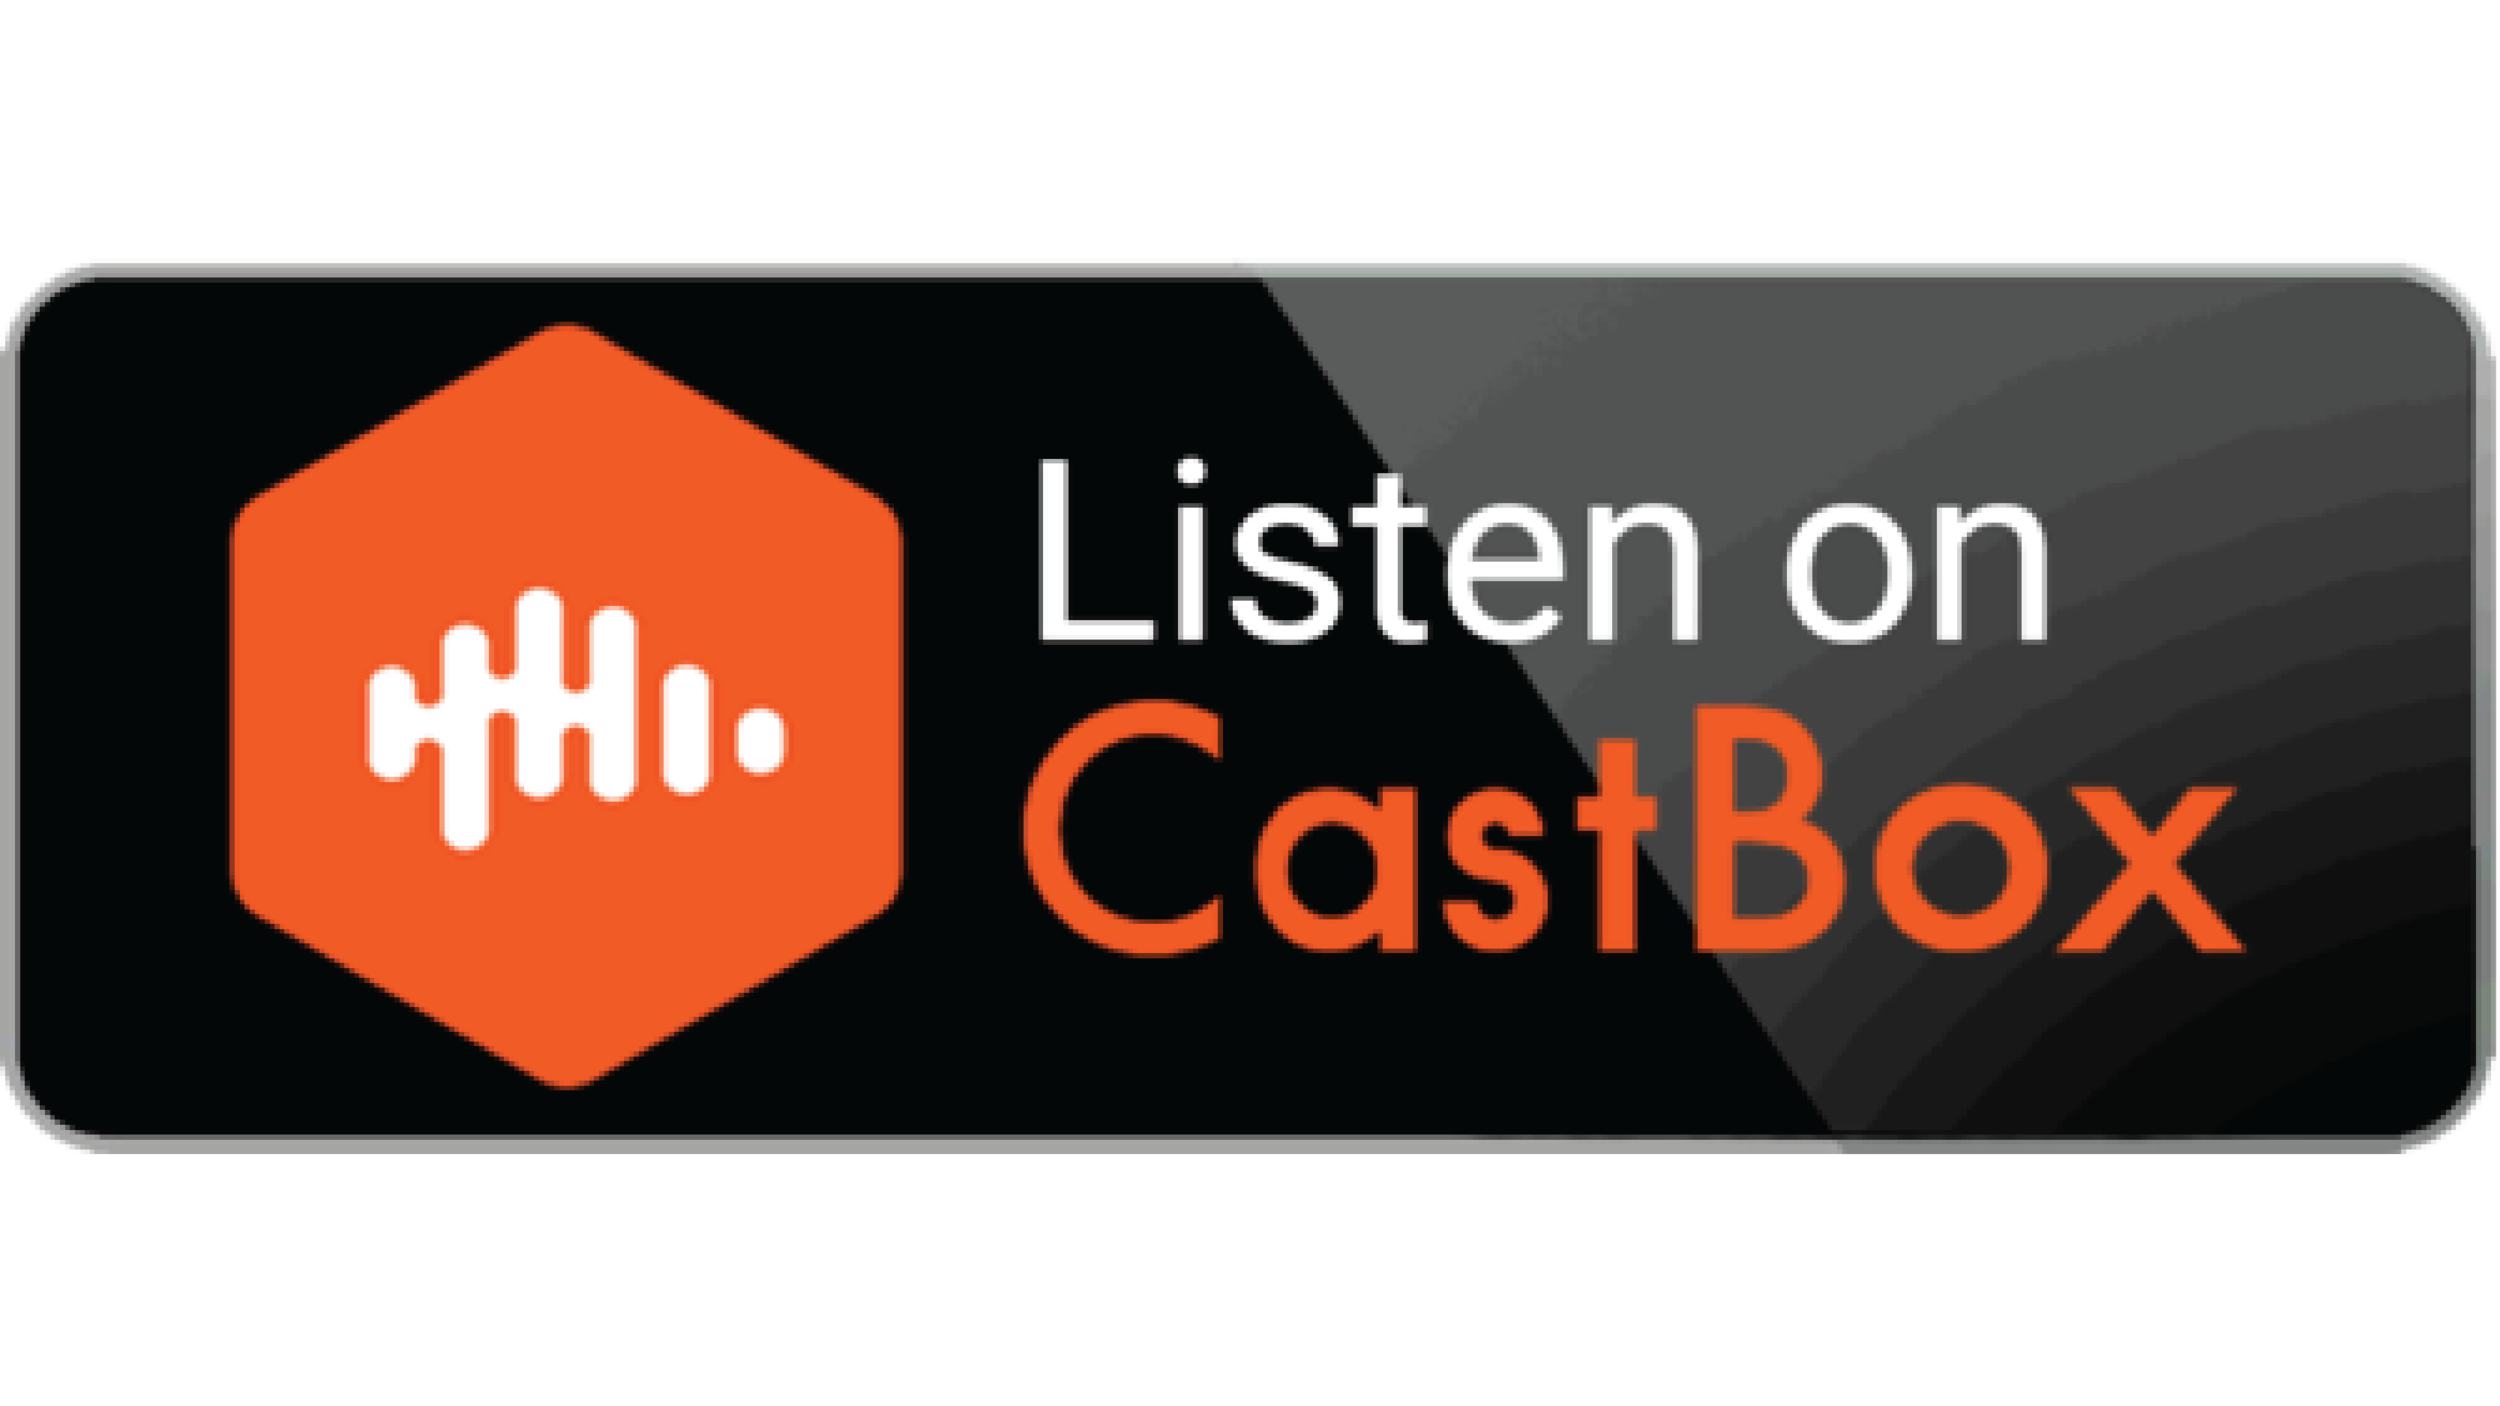 castbox-01.png